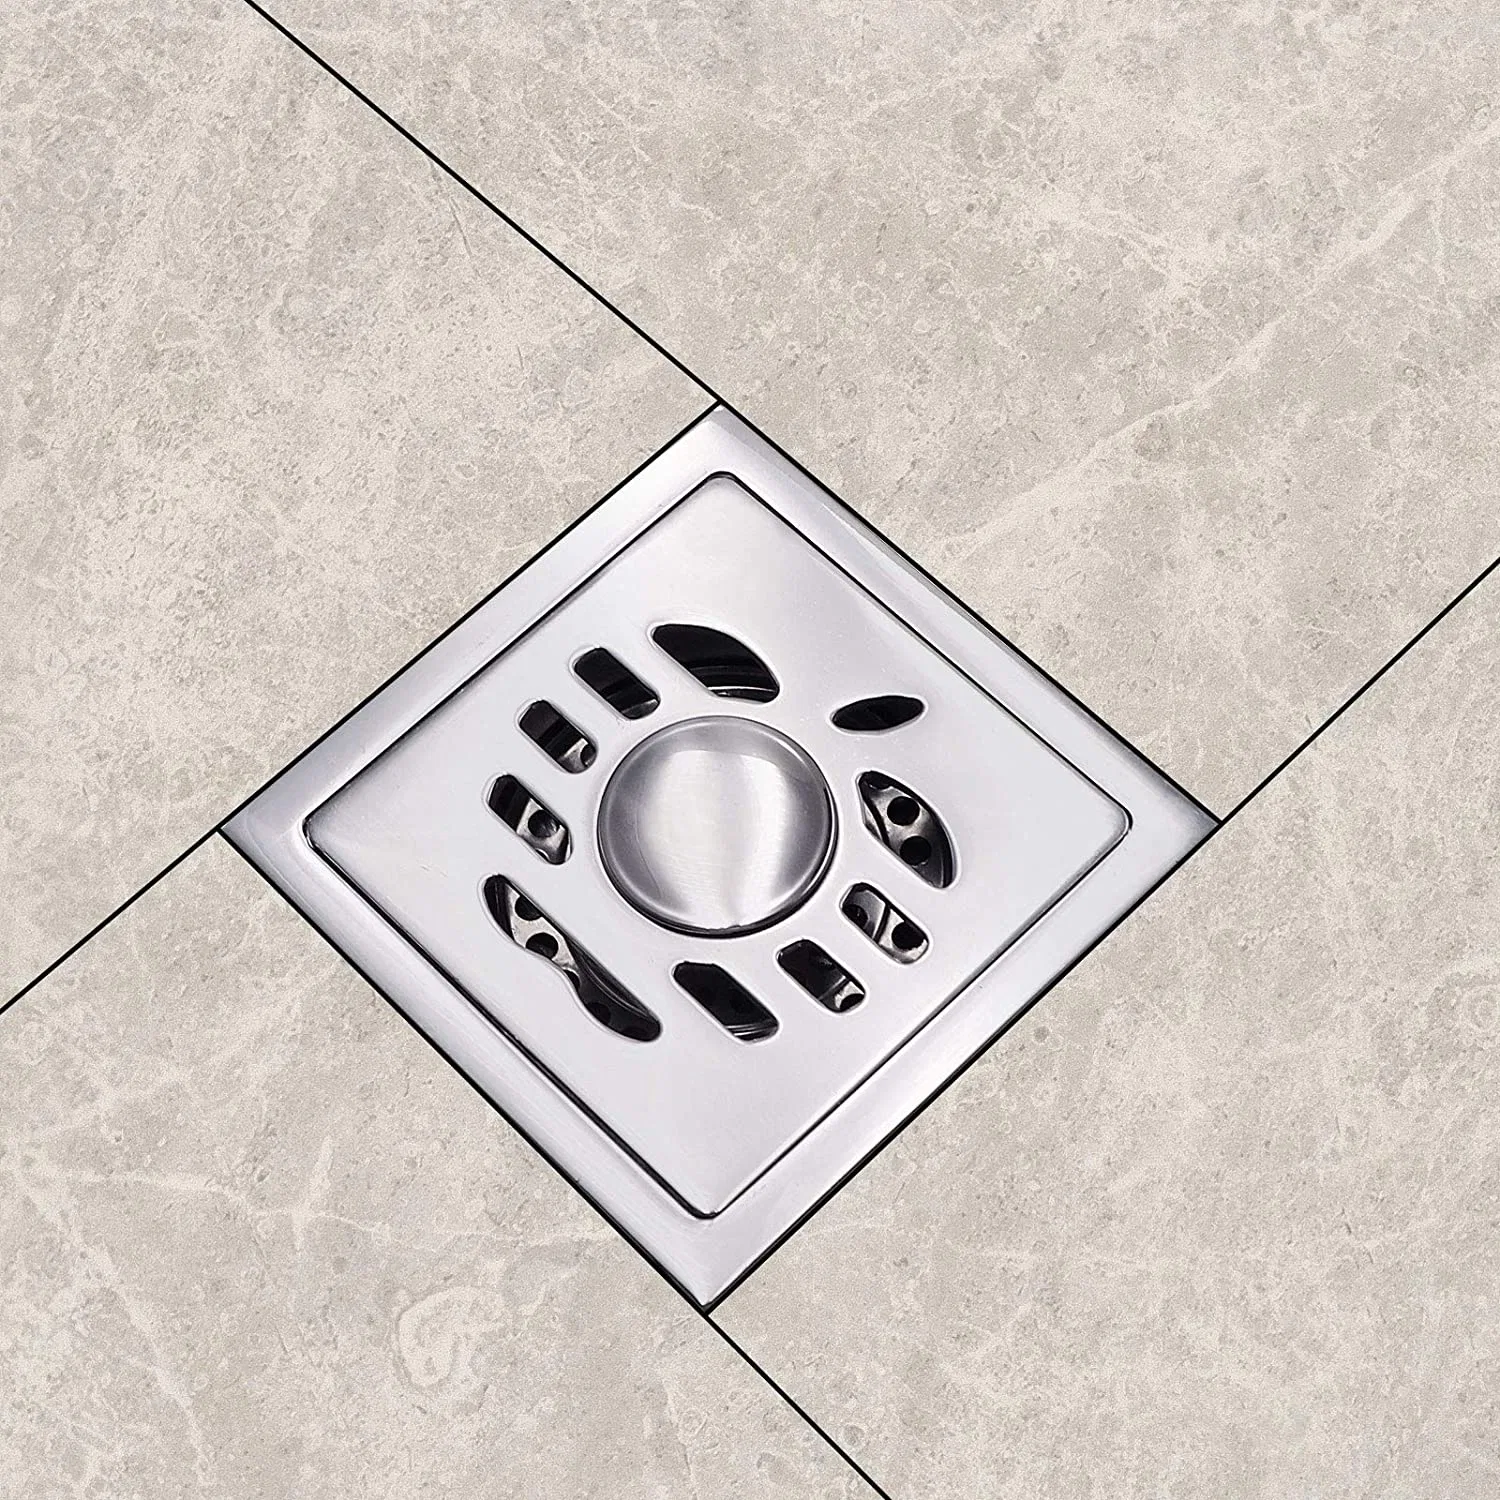 Square Bathroom Tile Insert Drain Ss Stainless Steel with Strainer Bug Proof Shower Floor Drain